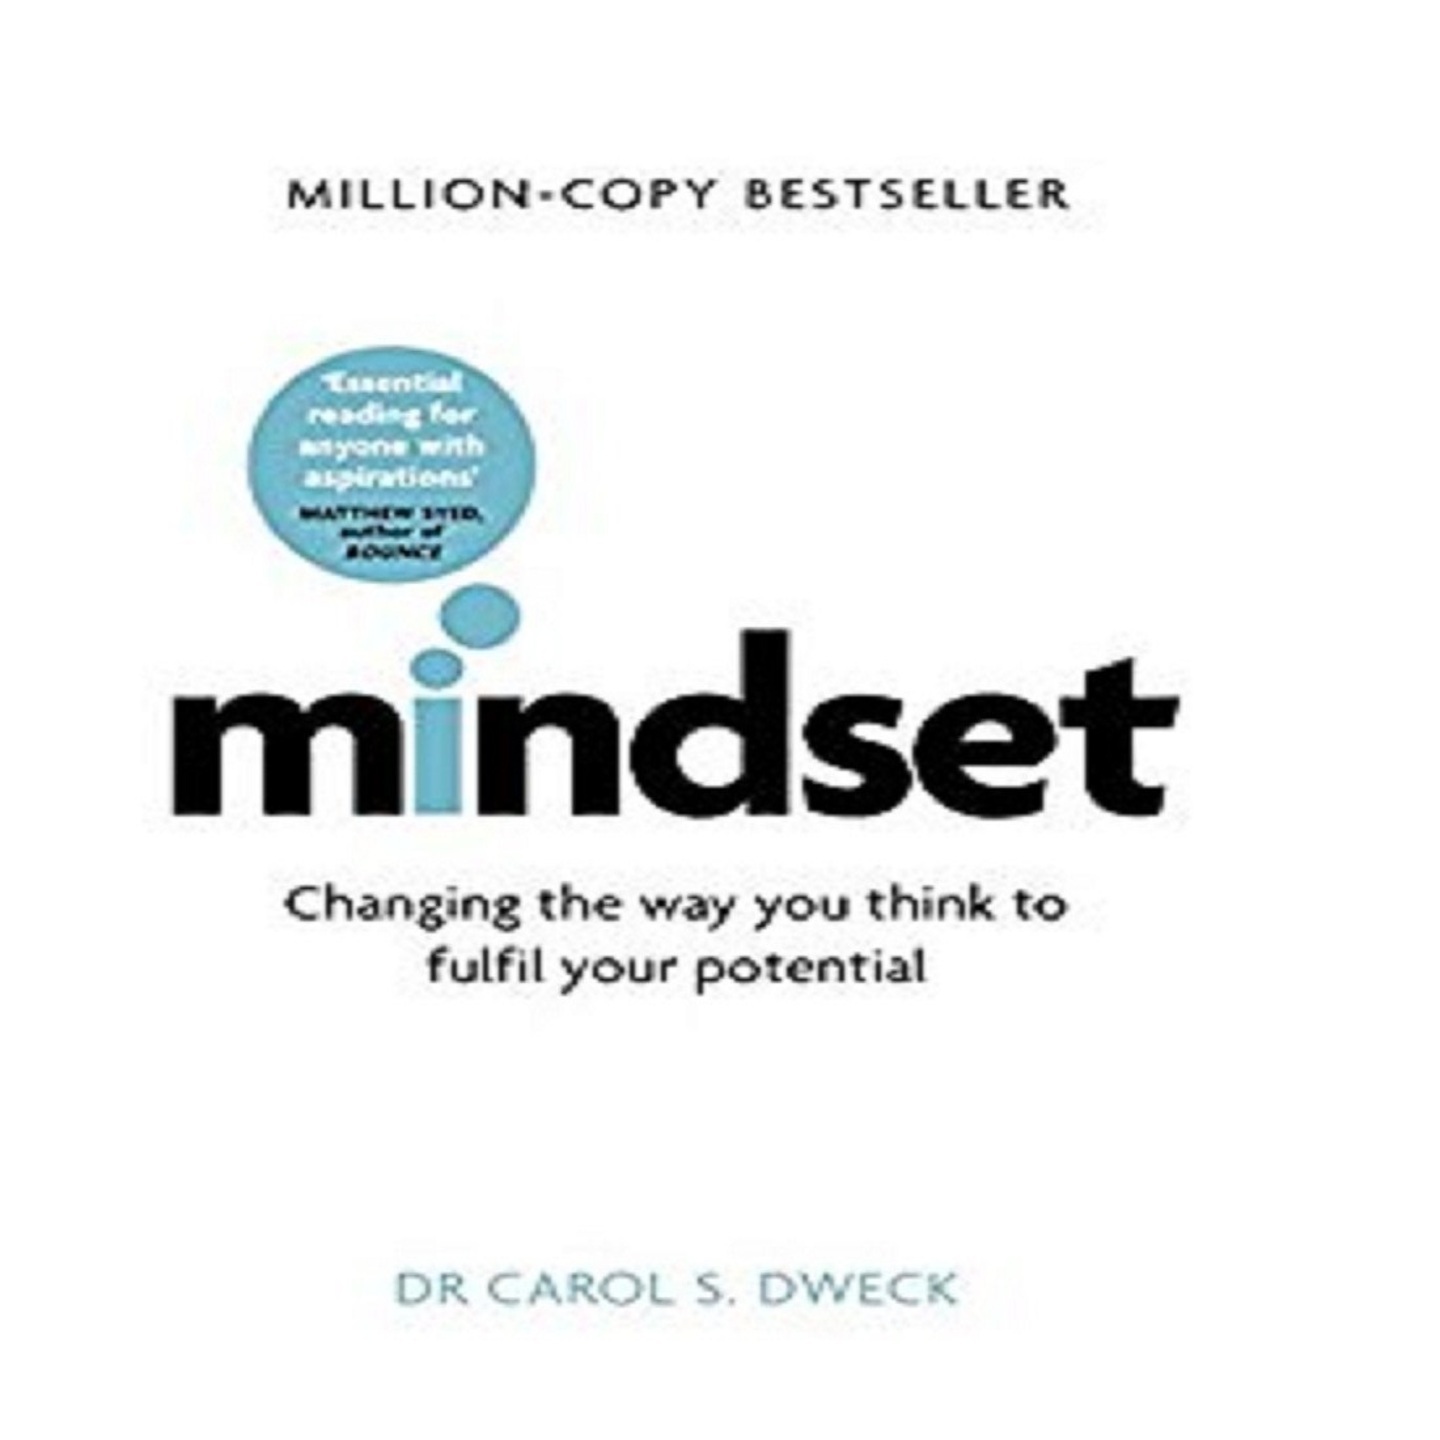 Book Mindset - Changing the way you think